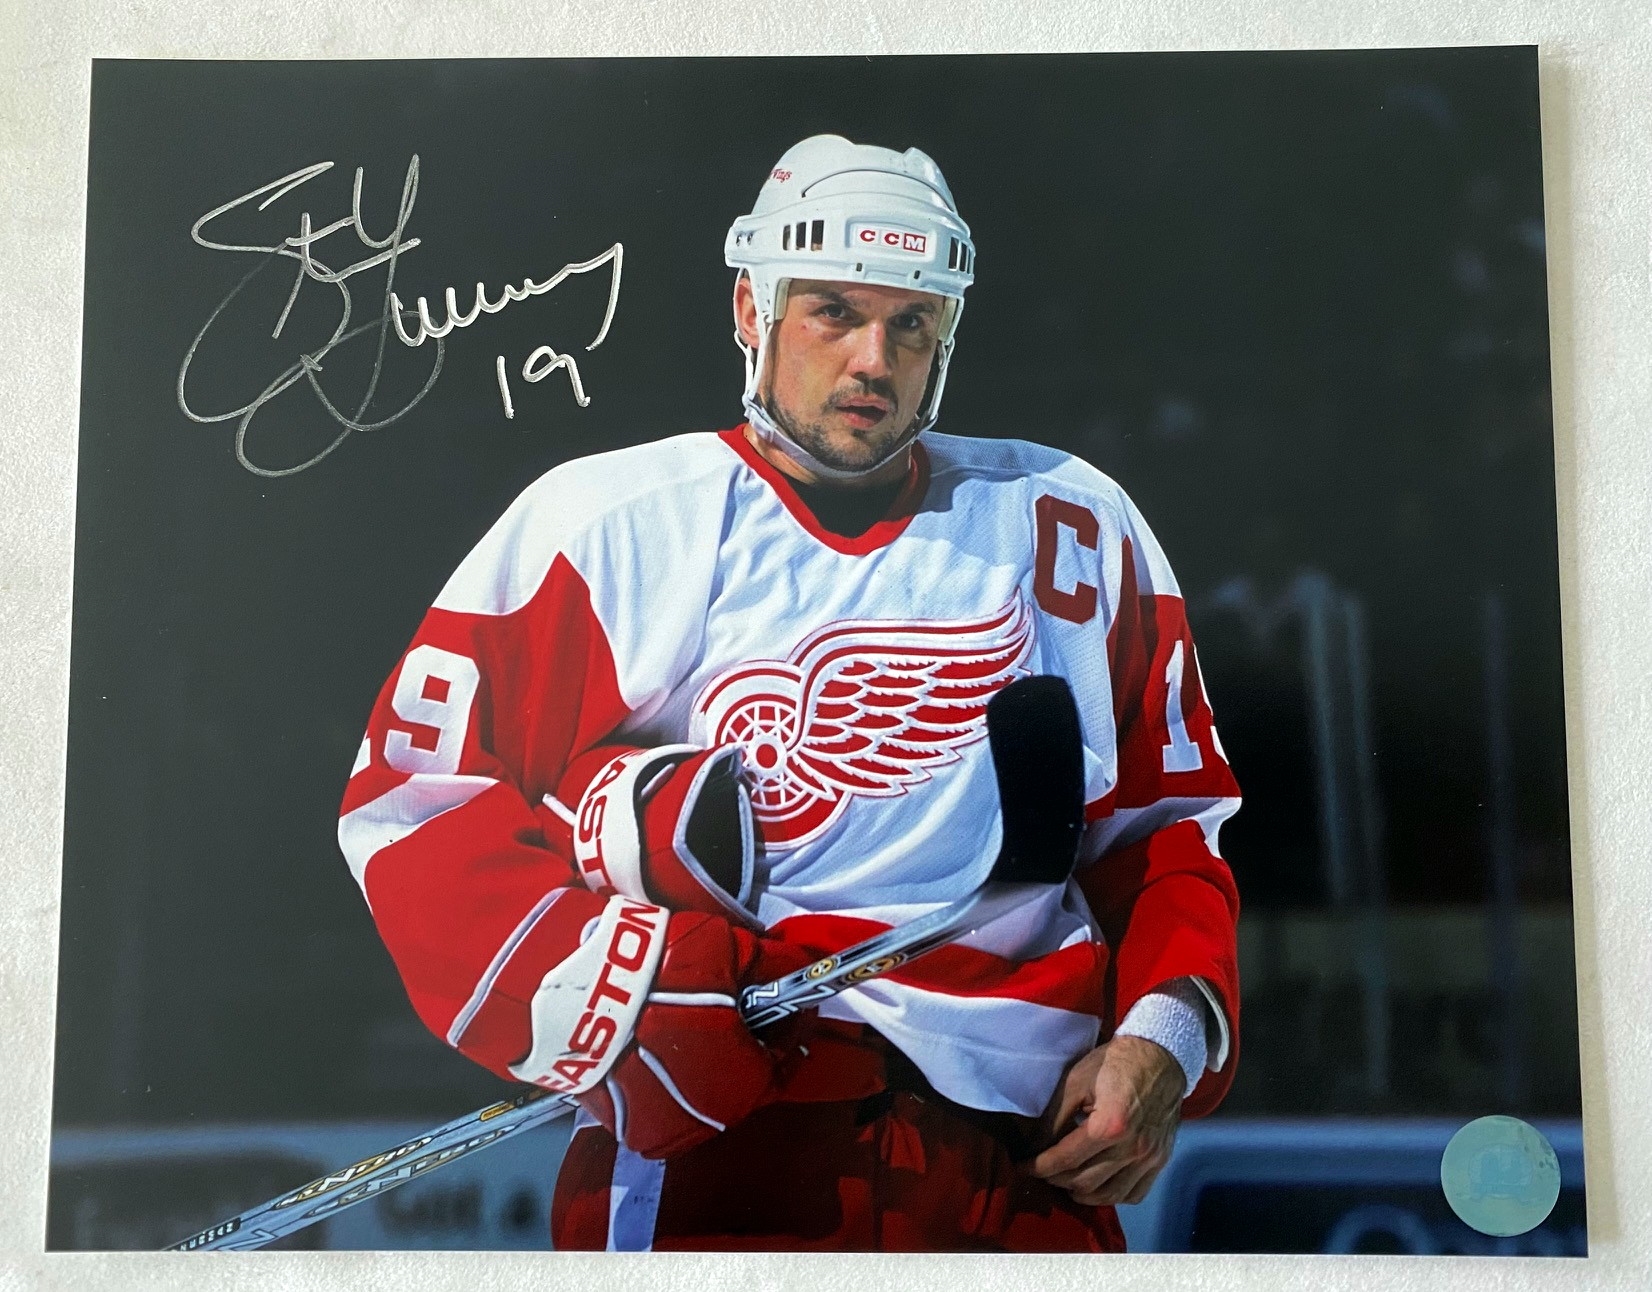 Steve Yzerman Detroit Red Wings Signed Captain 8x10 Photo (Flawed)